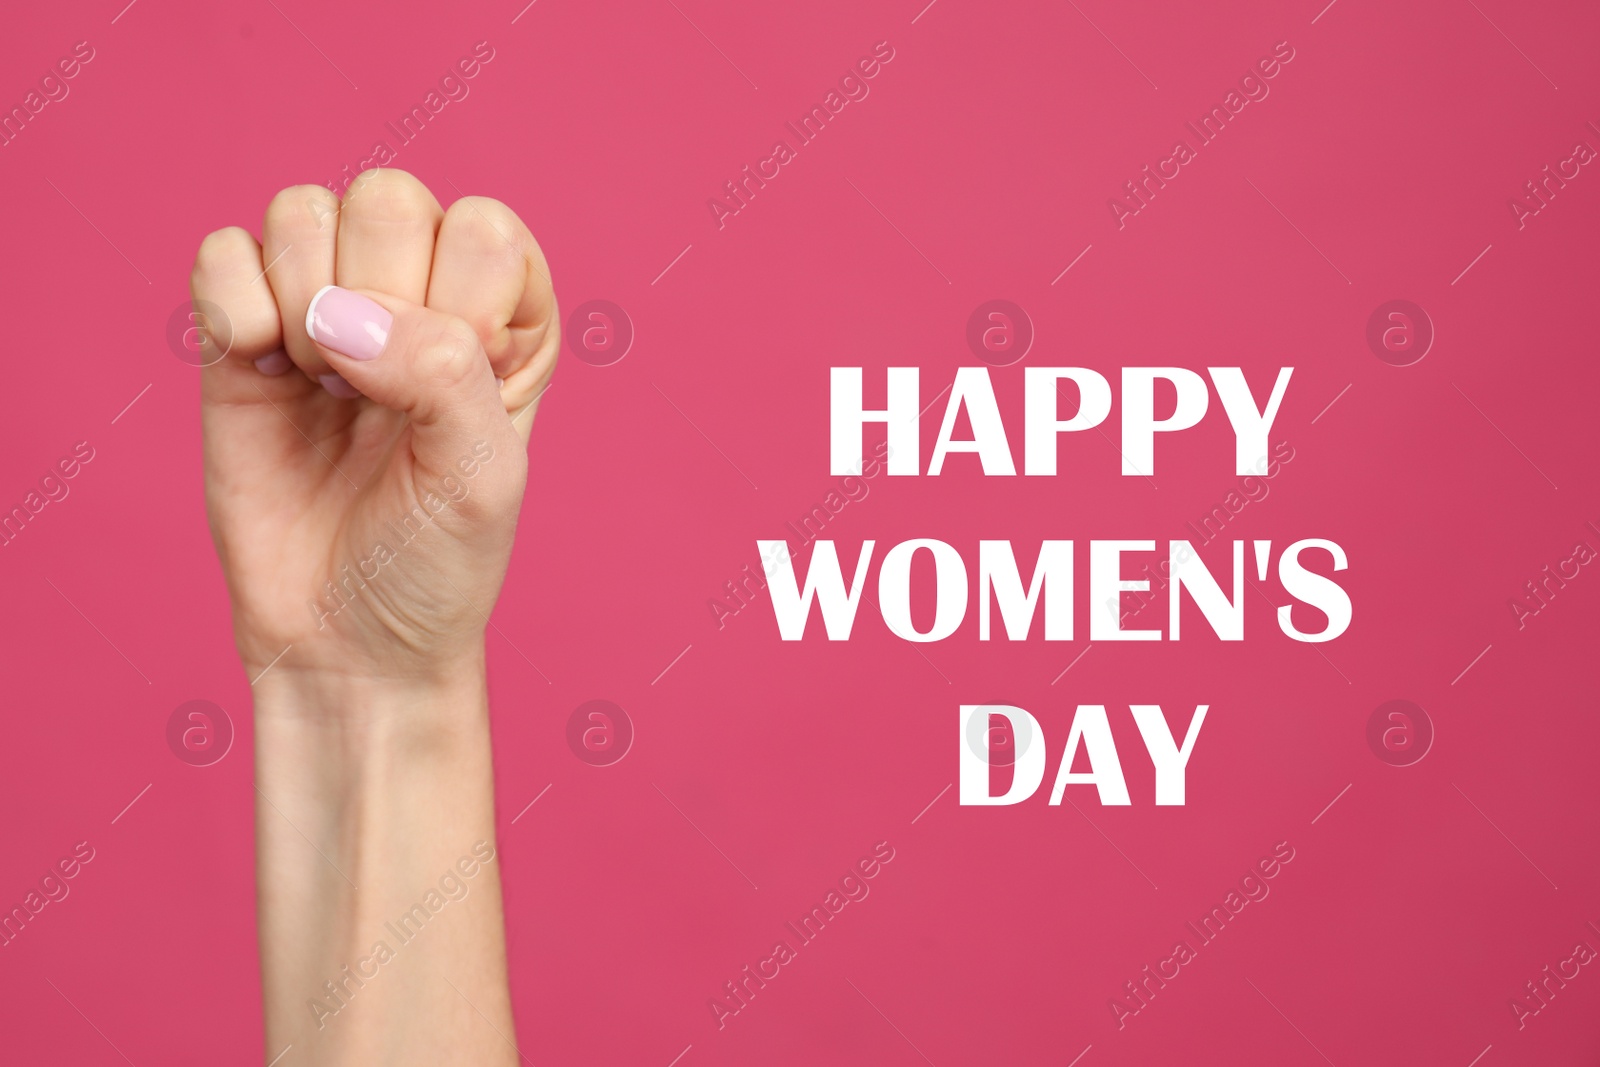 Image of Woman showing fist as girl power symbol on pink background, closeup. Happy Women's Day